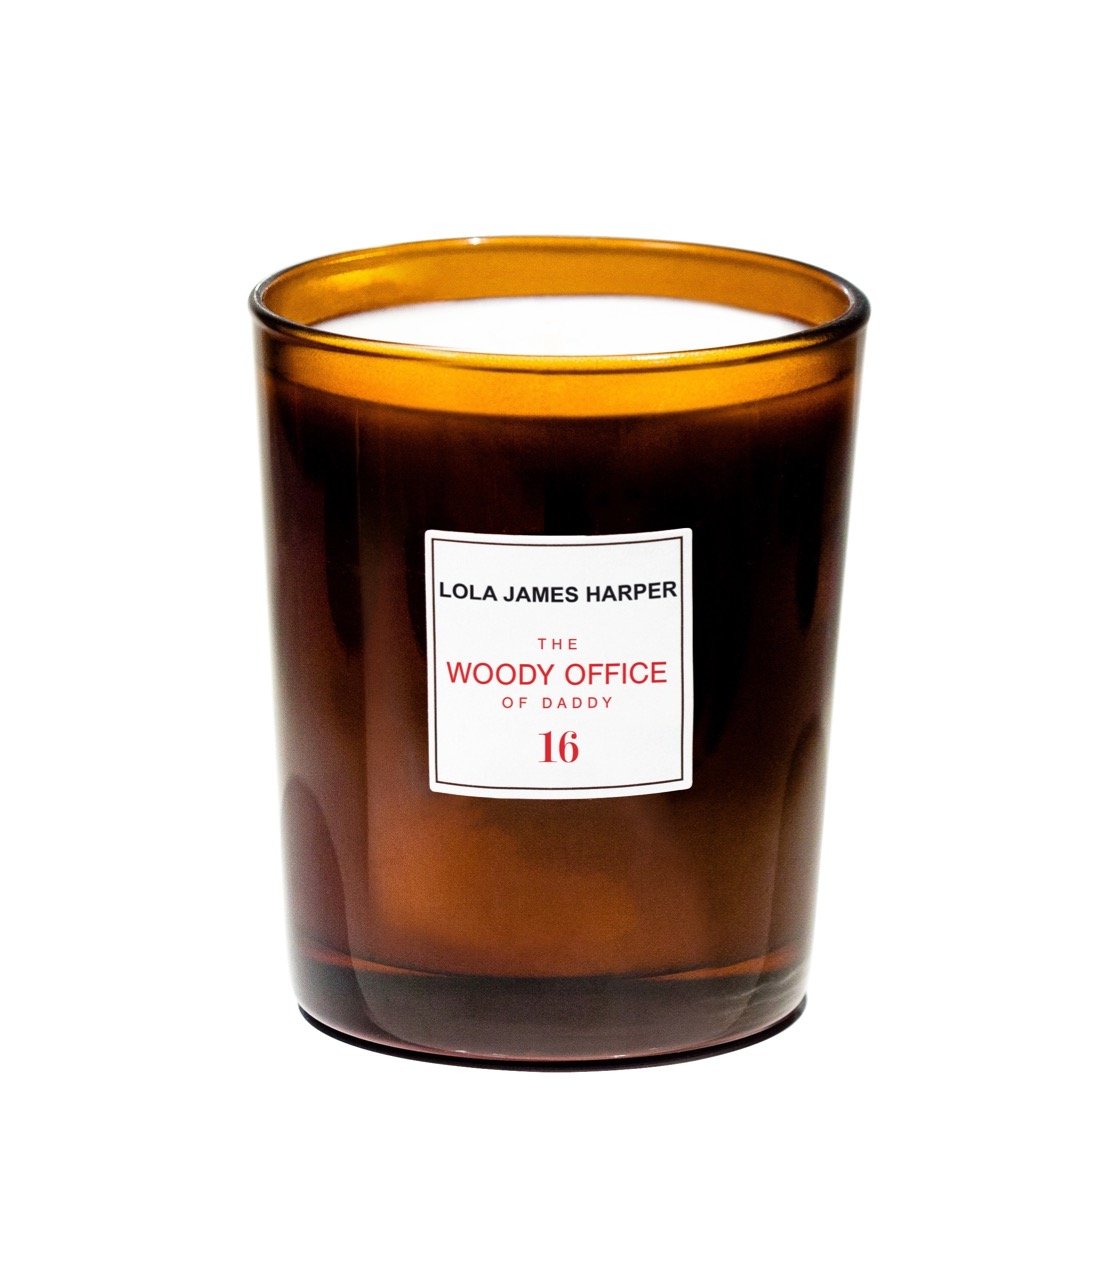 Lola James Harper Candle - The Woody Office of Daddy